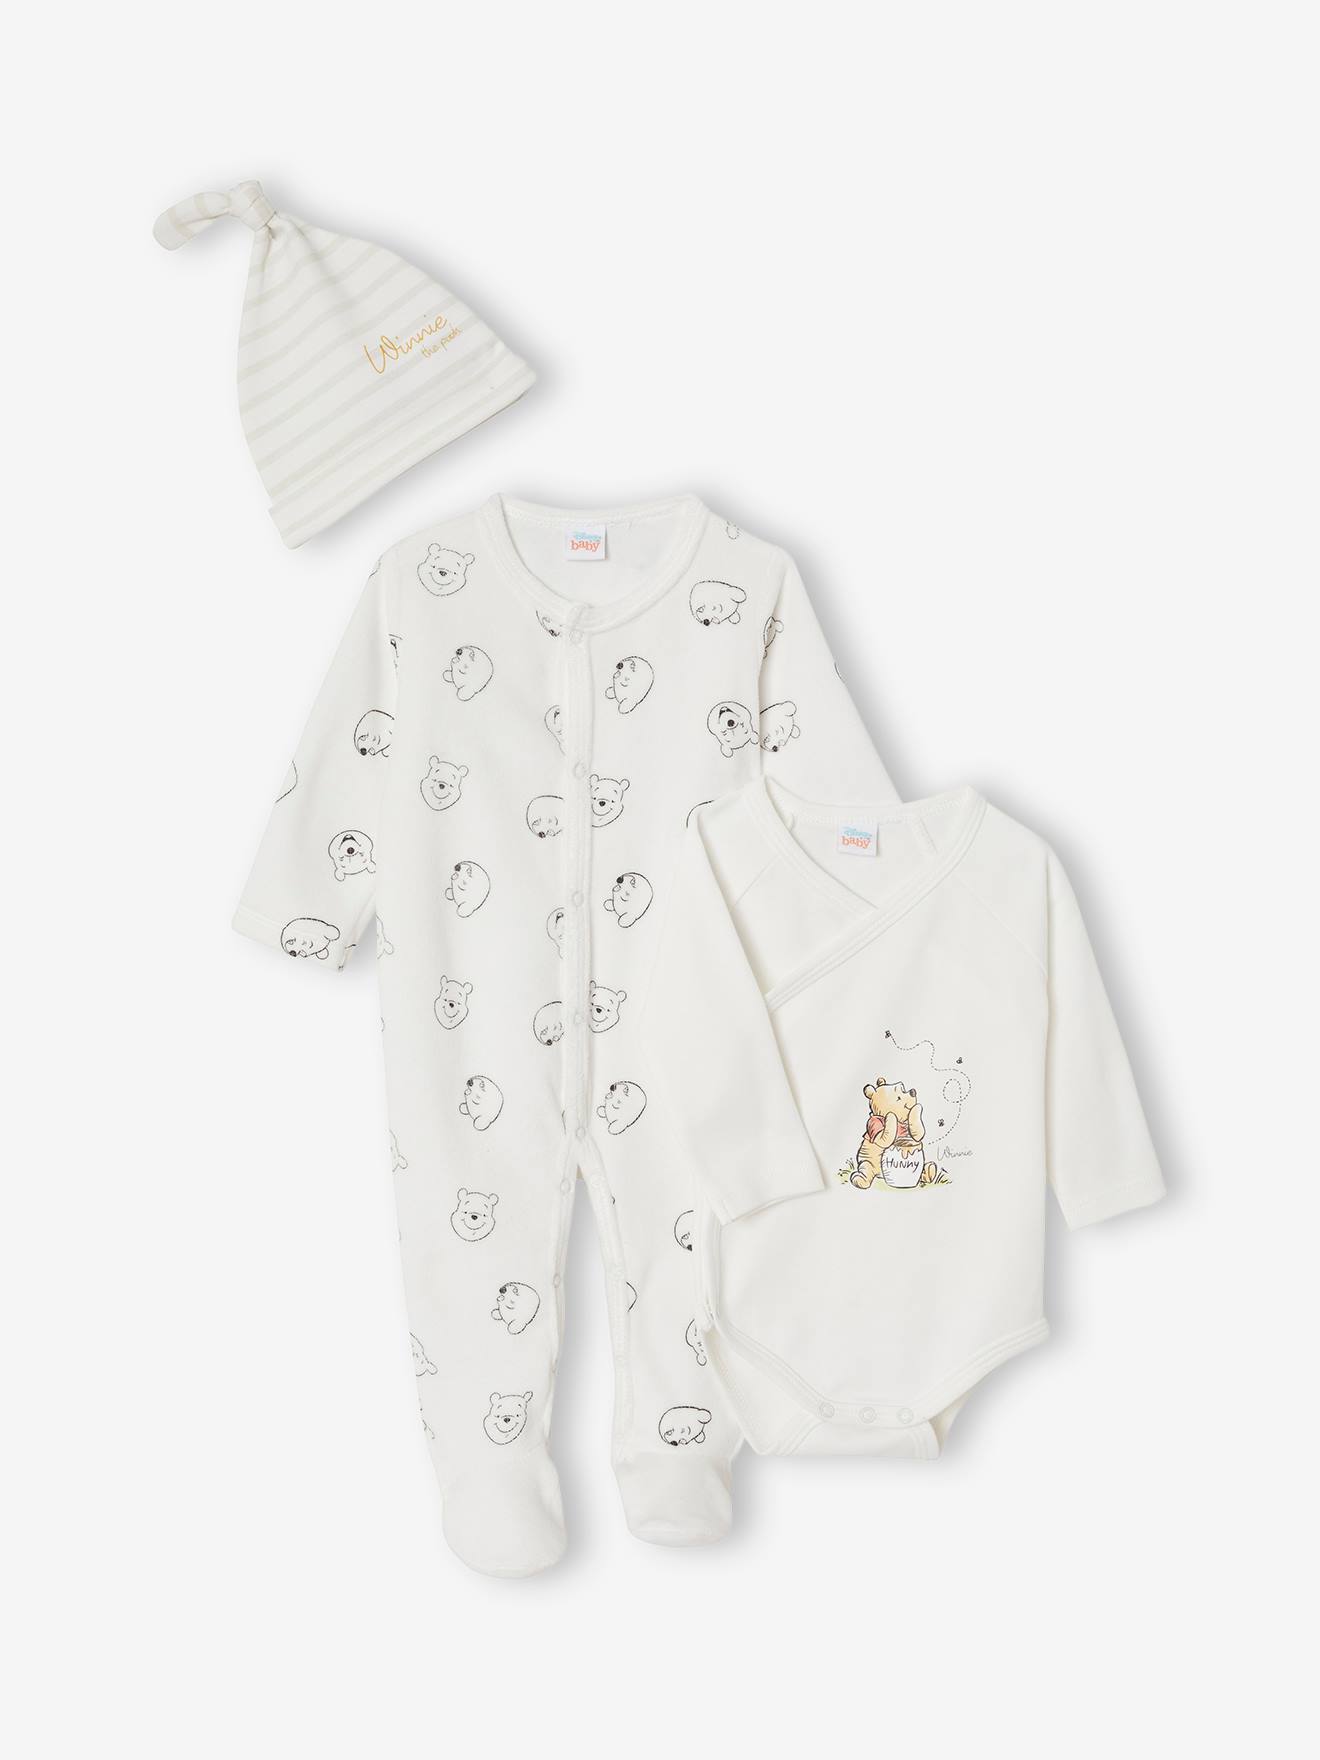 Winnie the Pooh Sleepsuit + Bodysuit + Beanie Set for Baby Boys by Disney(r) beige light all over printed